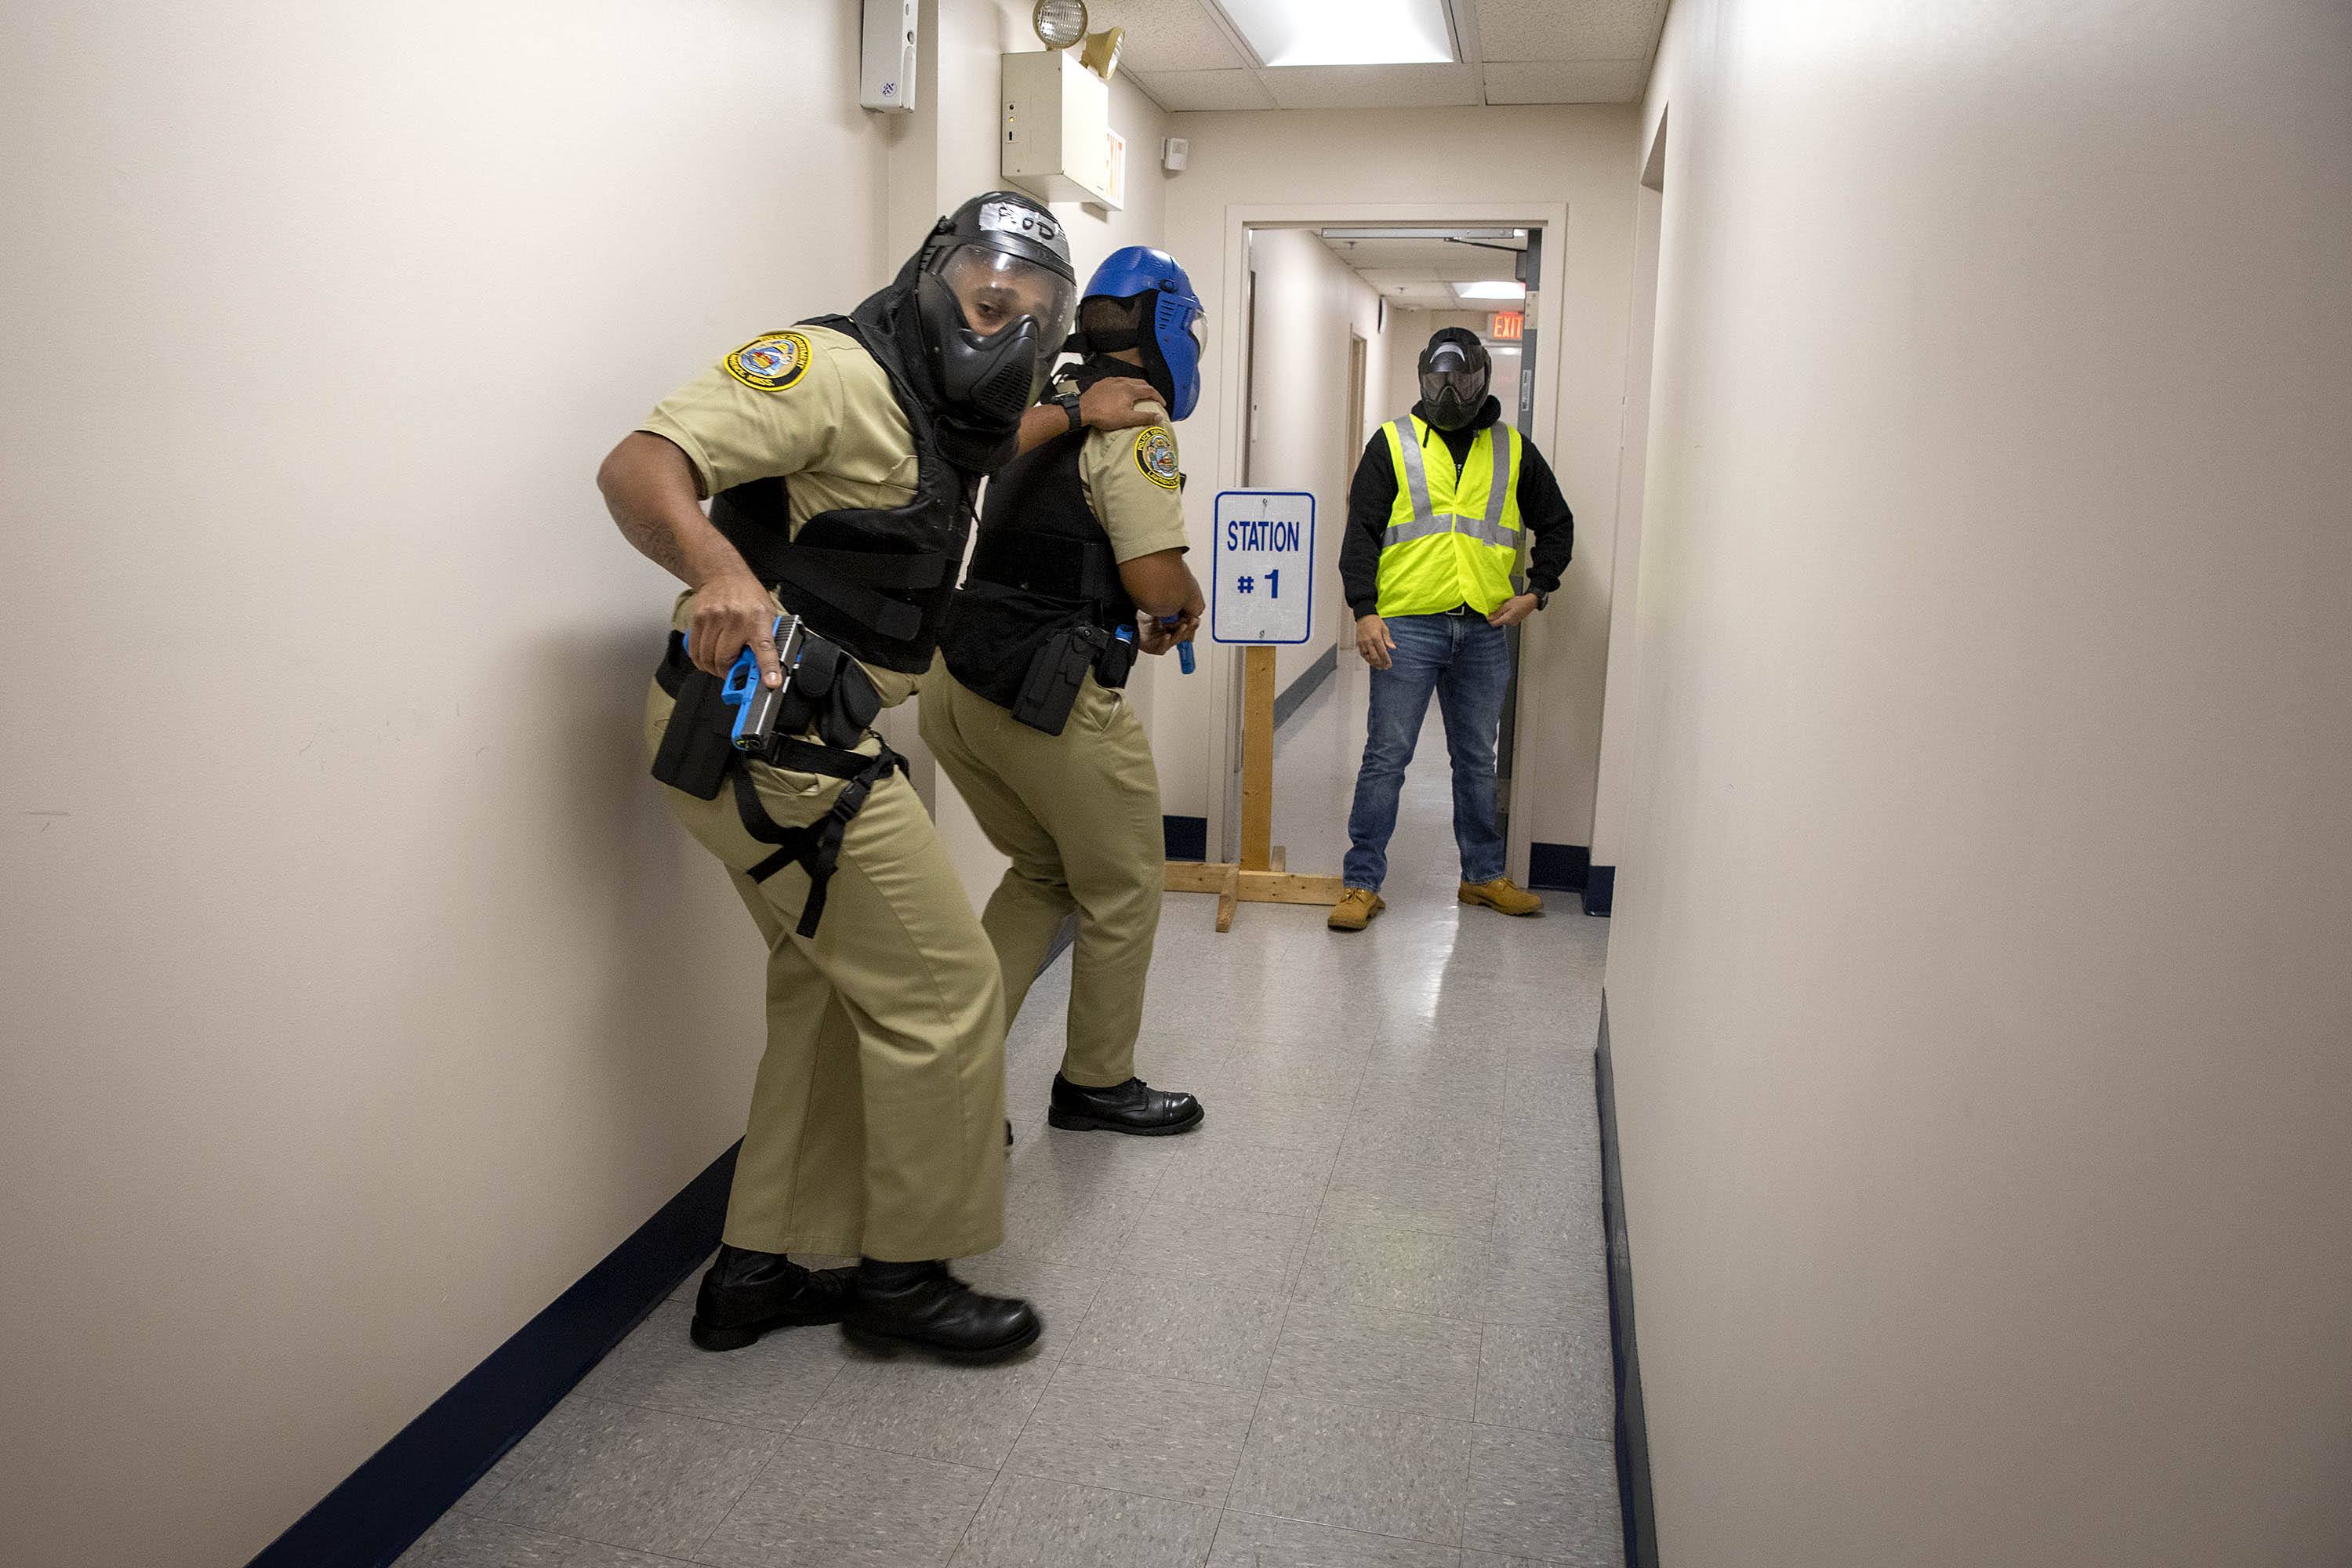 During a police academy training session two student officers, observed by an instructor, search a building for an armed person. (Robin Lubbock/WBUR)